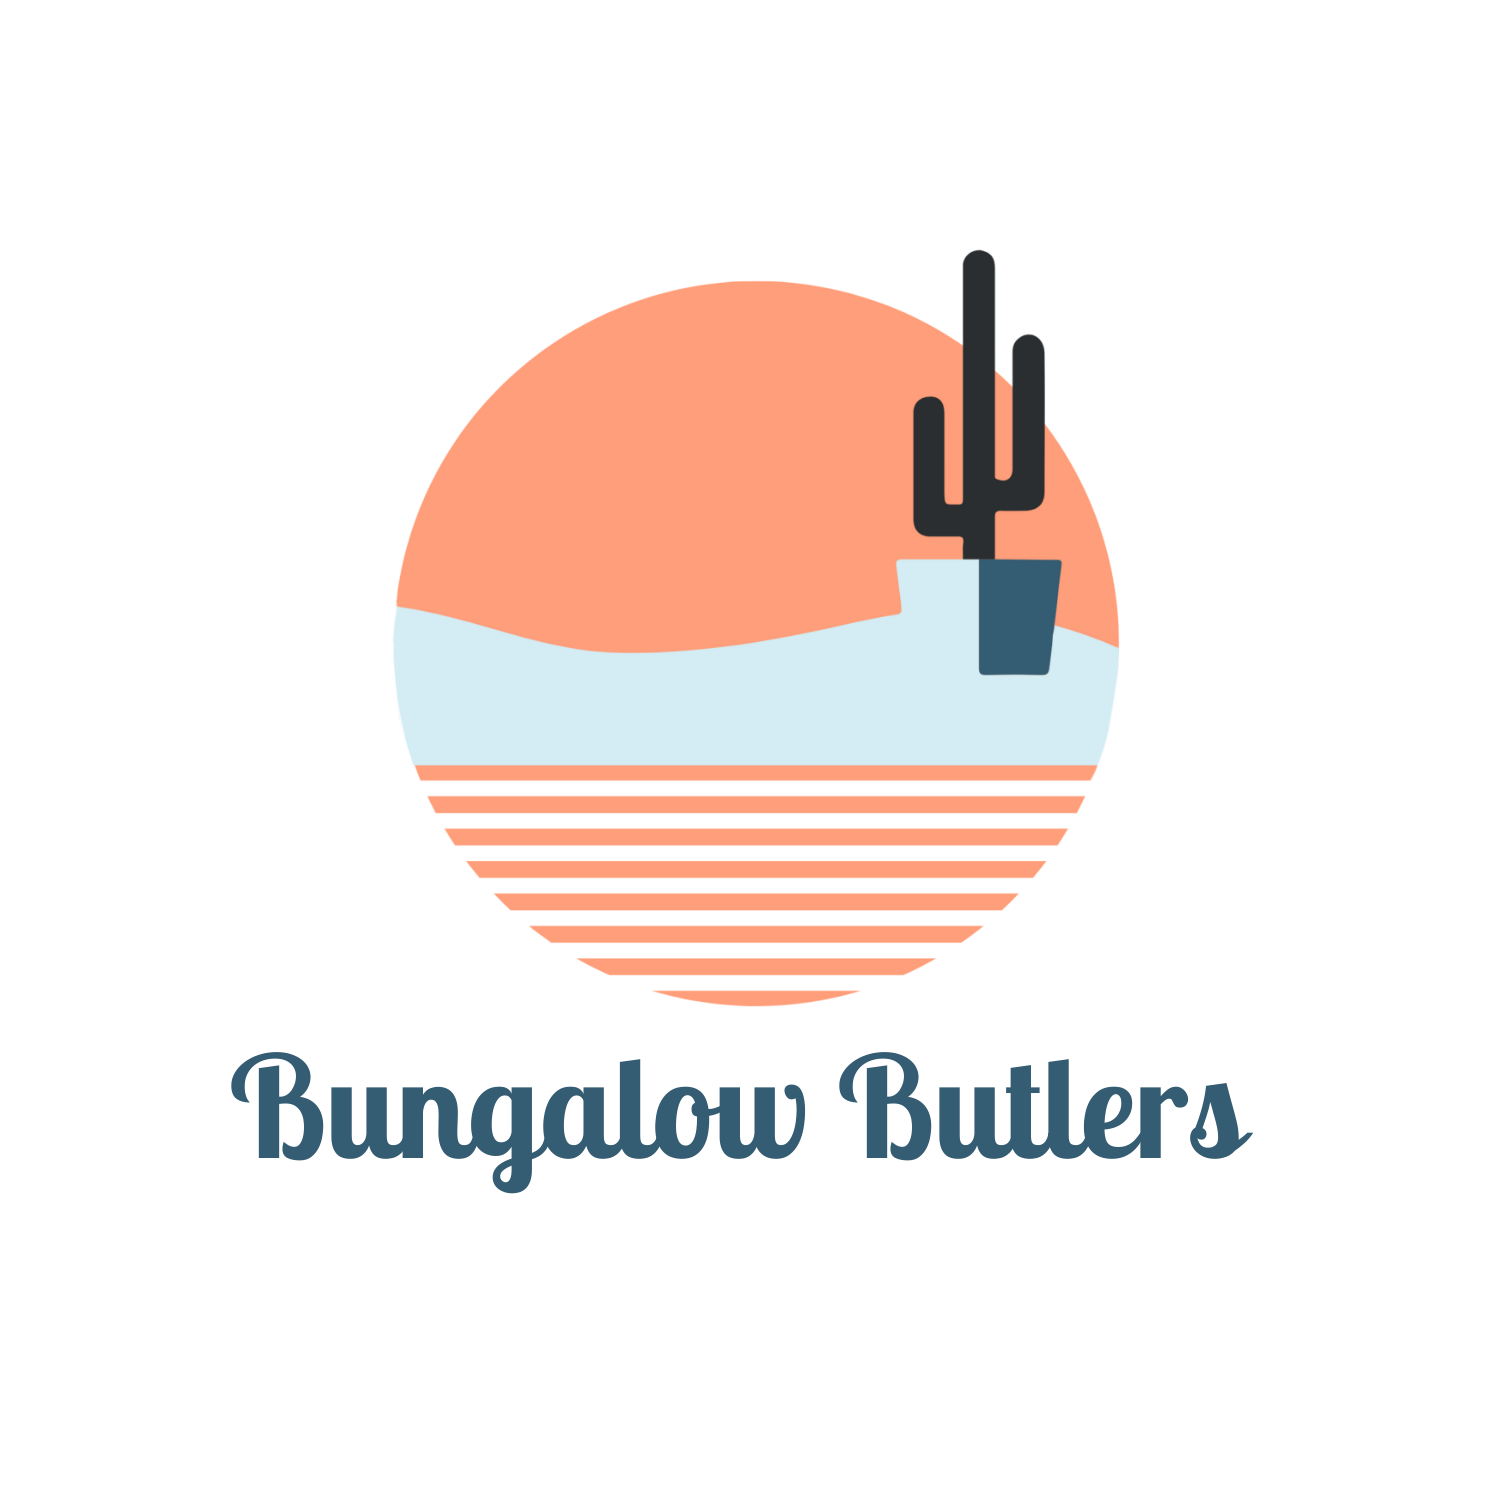 Bungalow Butlers